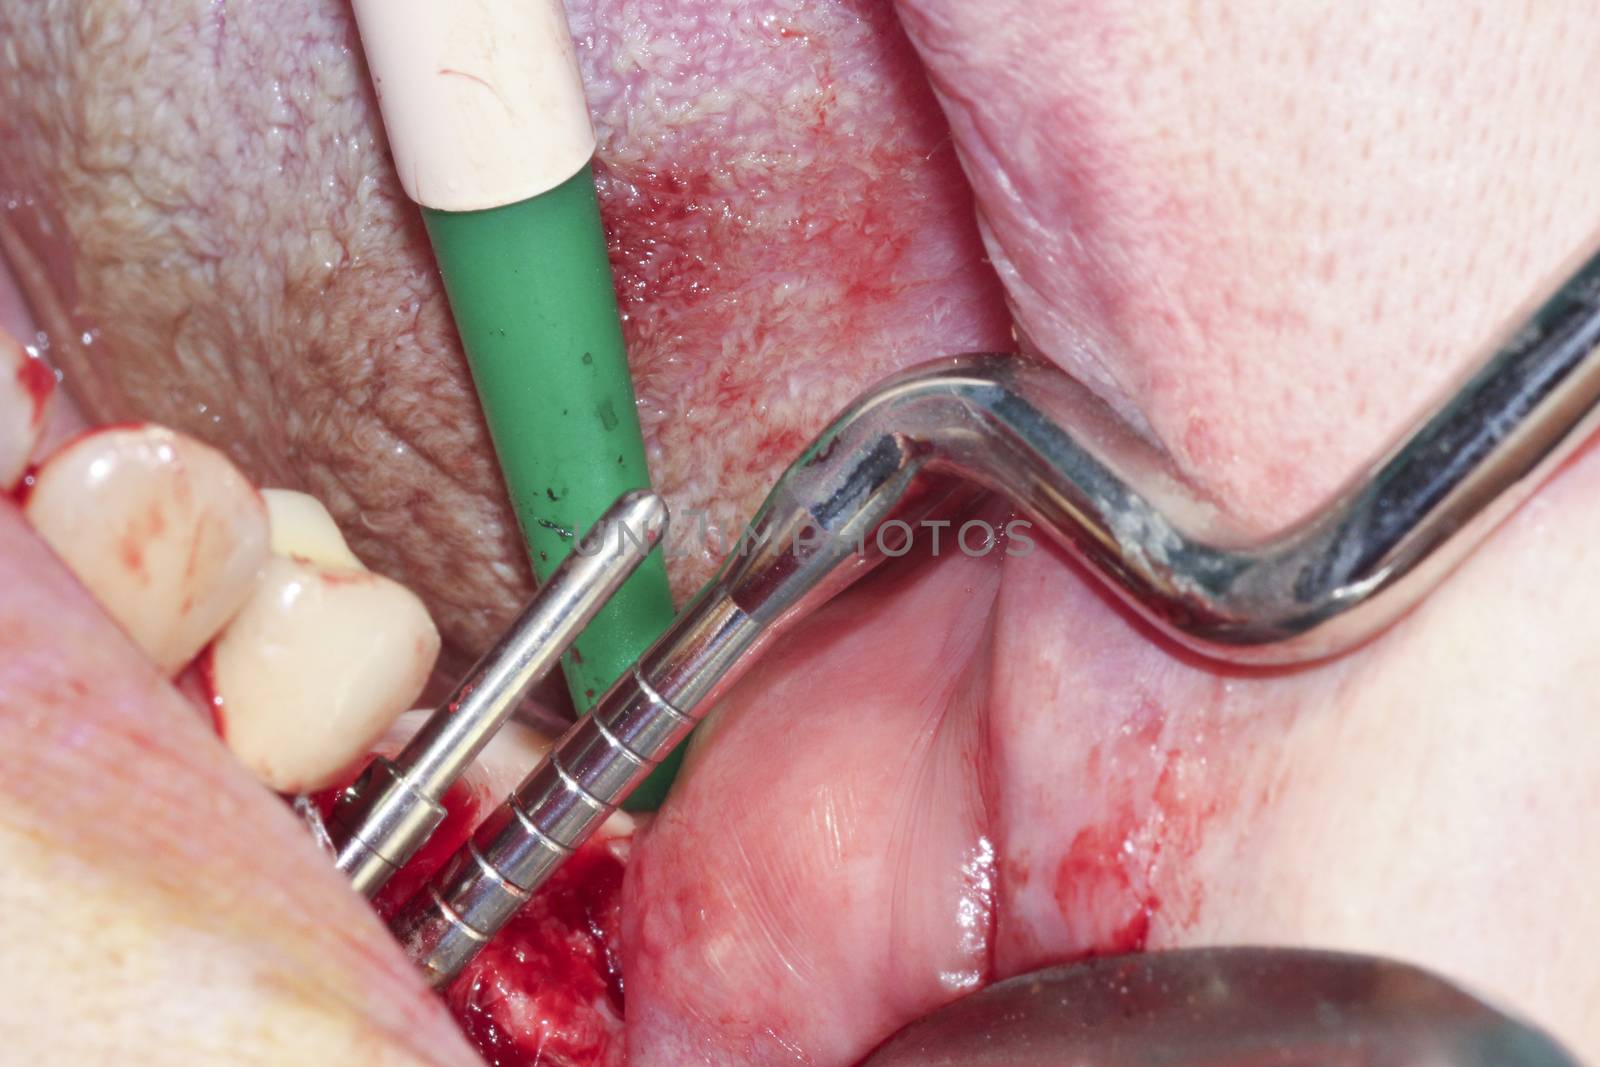 Surgical operation on the molars. Dental Implant by GemaIbarra